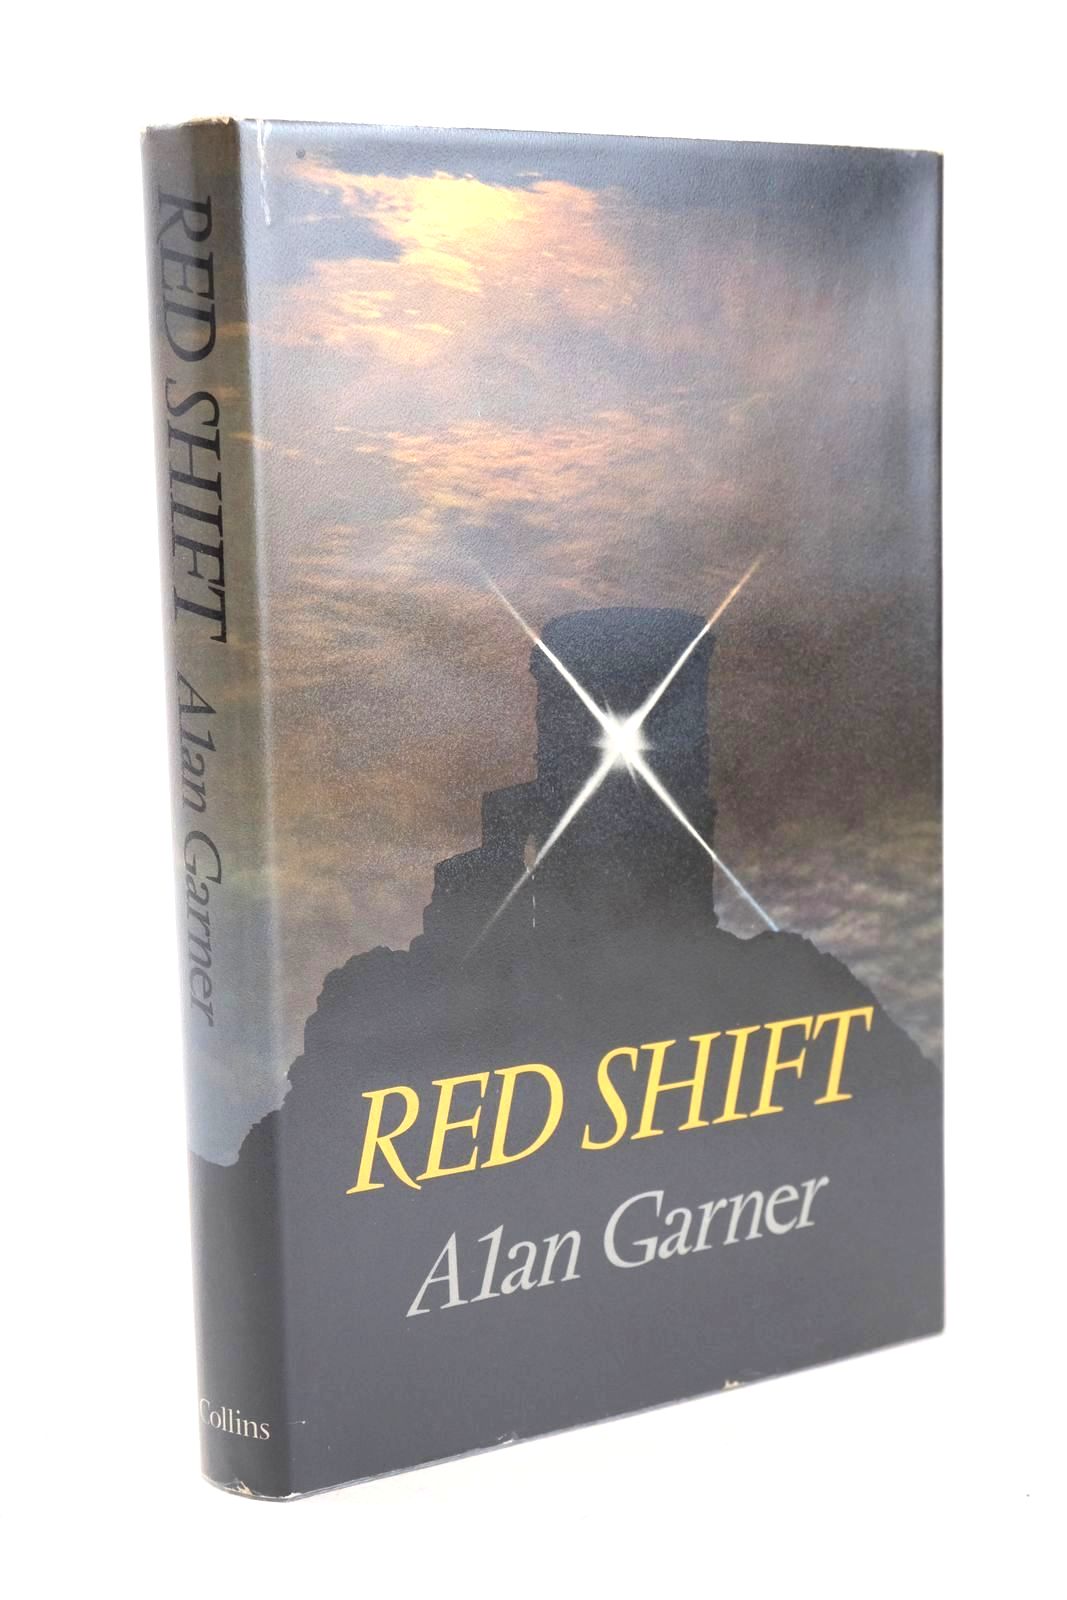 Photo of RED SHIFT written by Garner, Alan published by Collins (STOCK CODE: 1327995)  for sale by Stella & Rose's Books